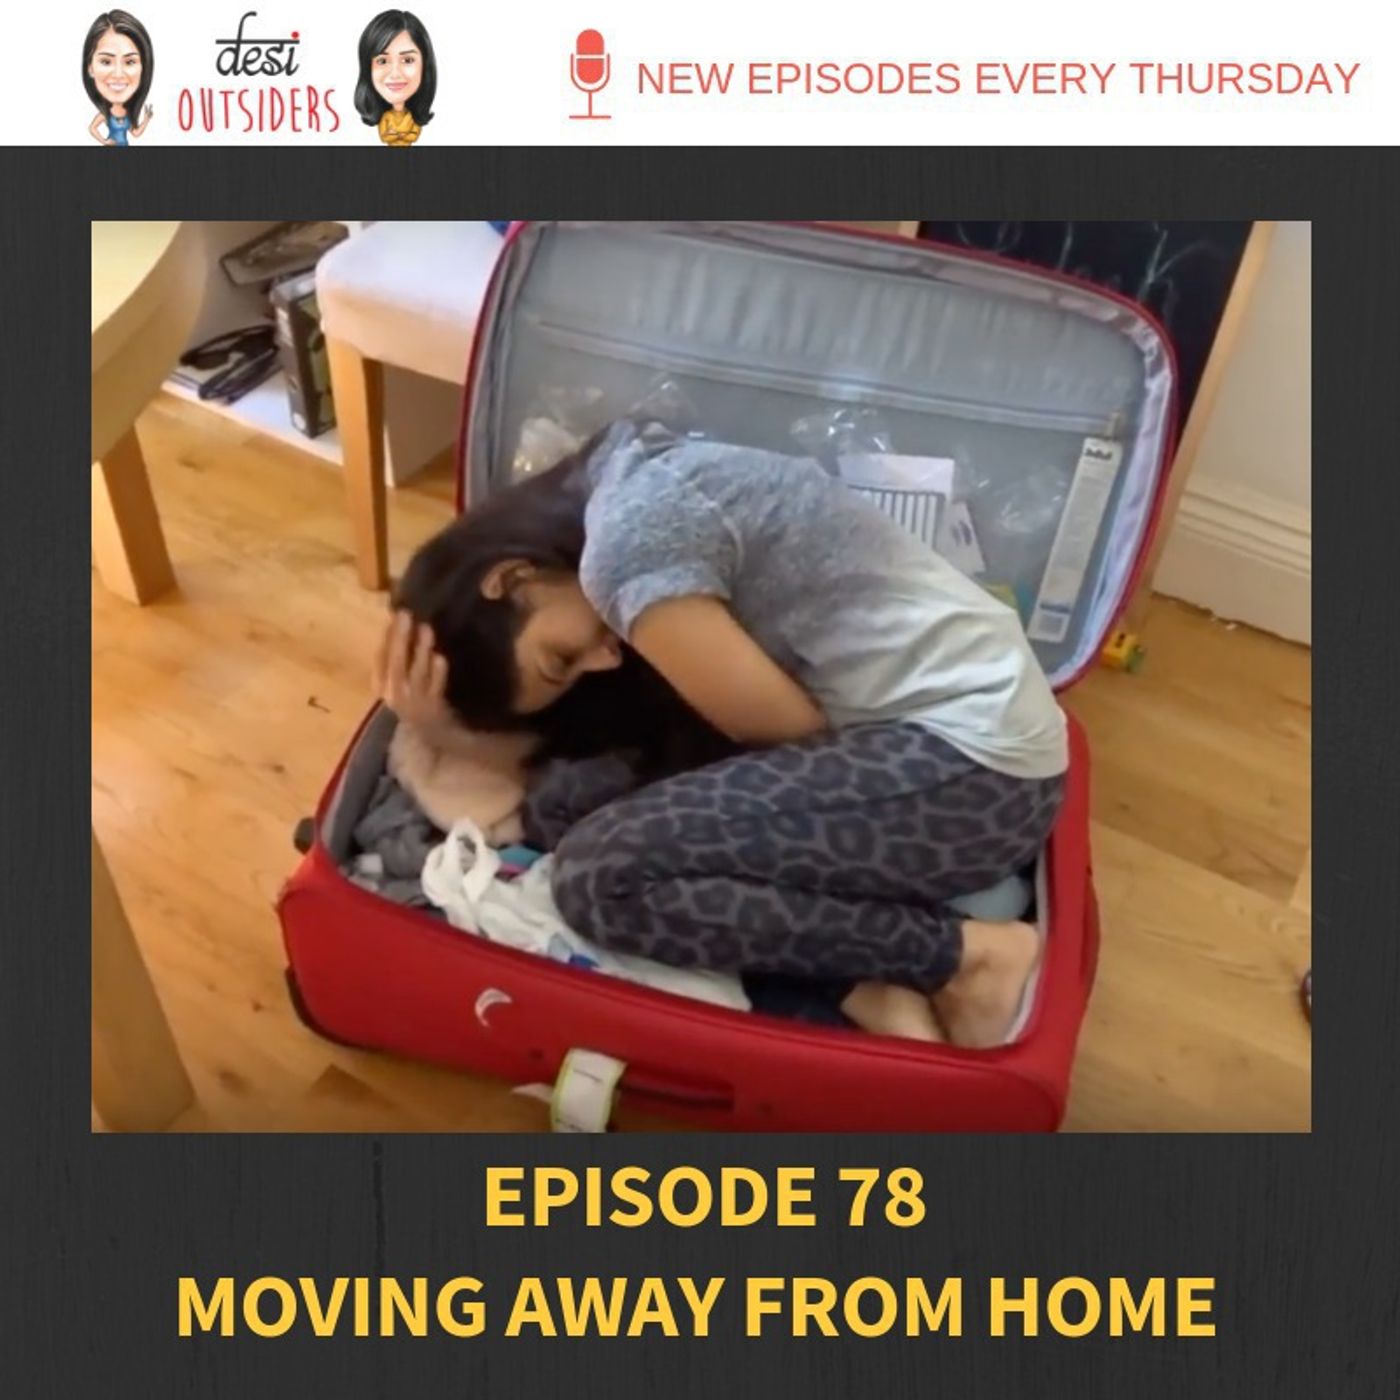 S5 Ep24: Episode 78 - Moving away from home